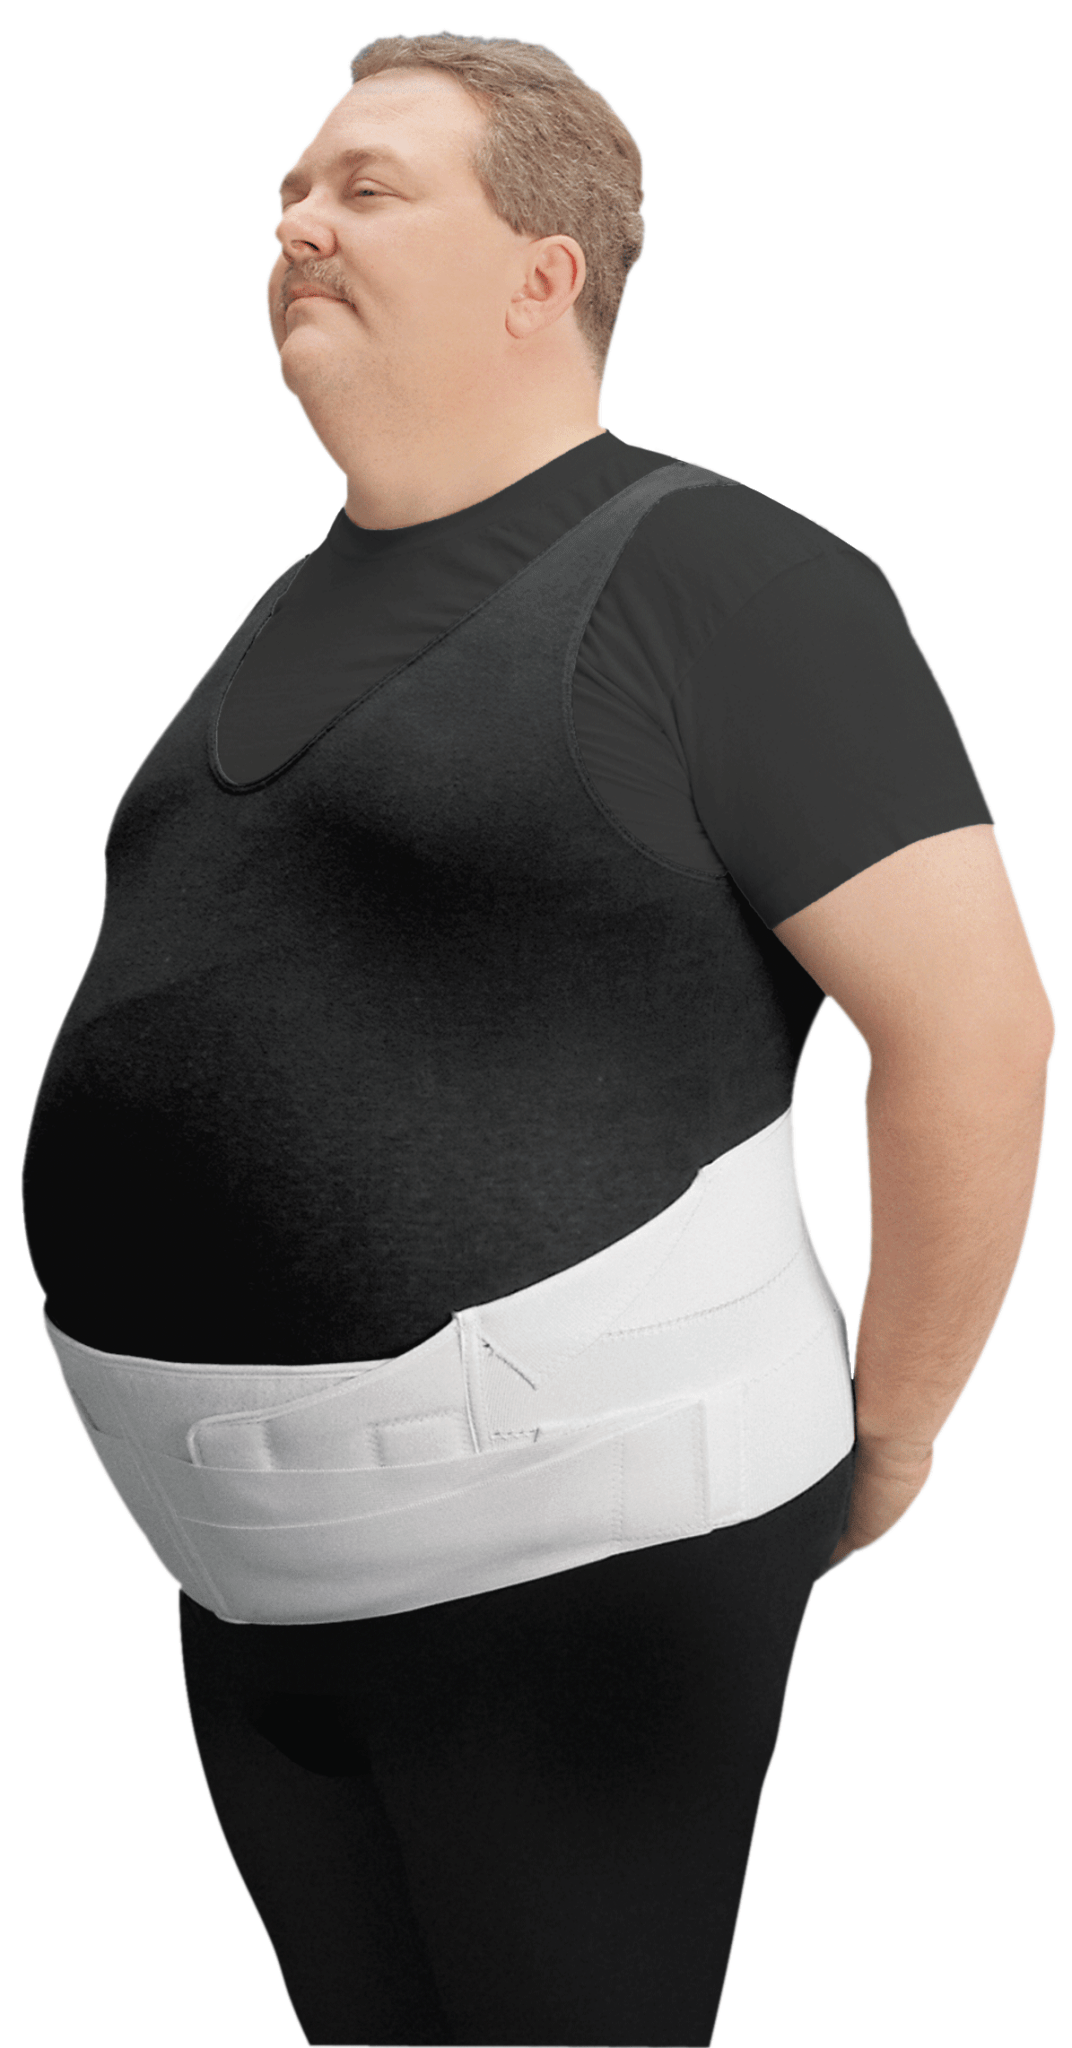 EA/1 - Leader Bariatric Back/Abdominal Support, White, +2 - Best Buy Medical Supplies